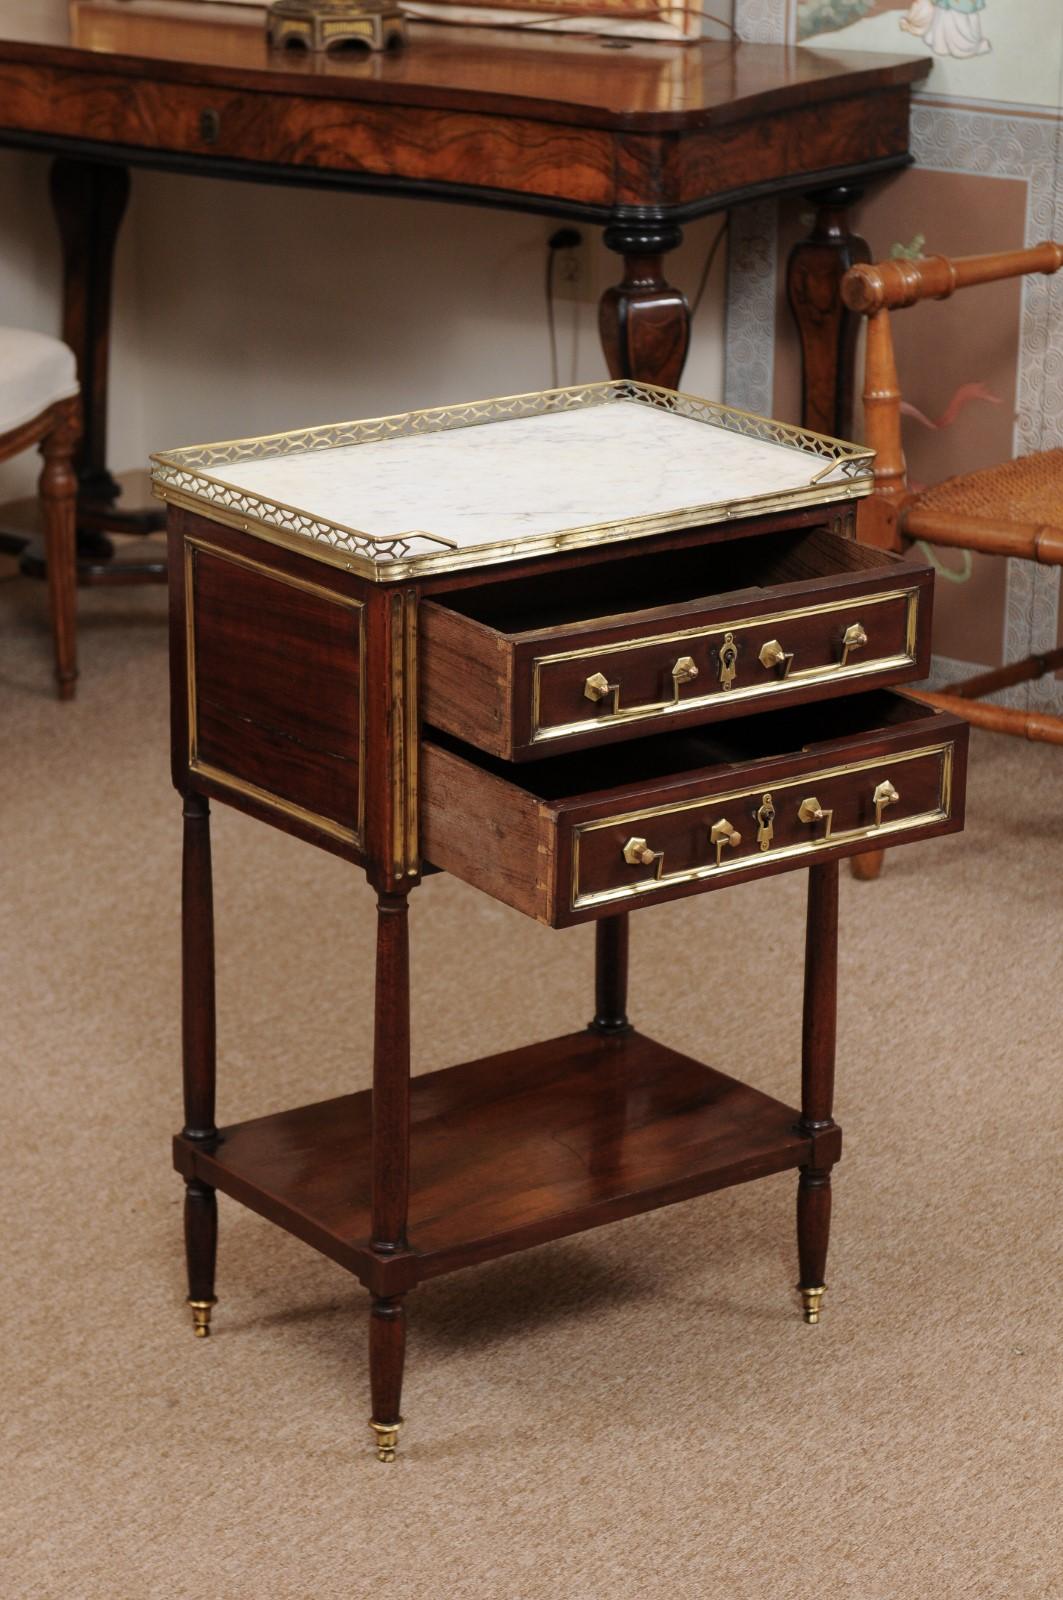 Louis XVI Walnut Chevet with 2 Drawers, Lower Shelf, and White Marble Top 1